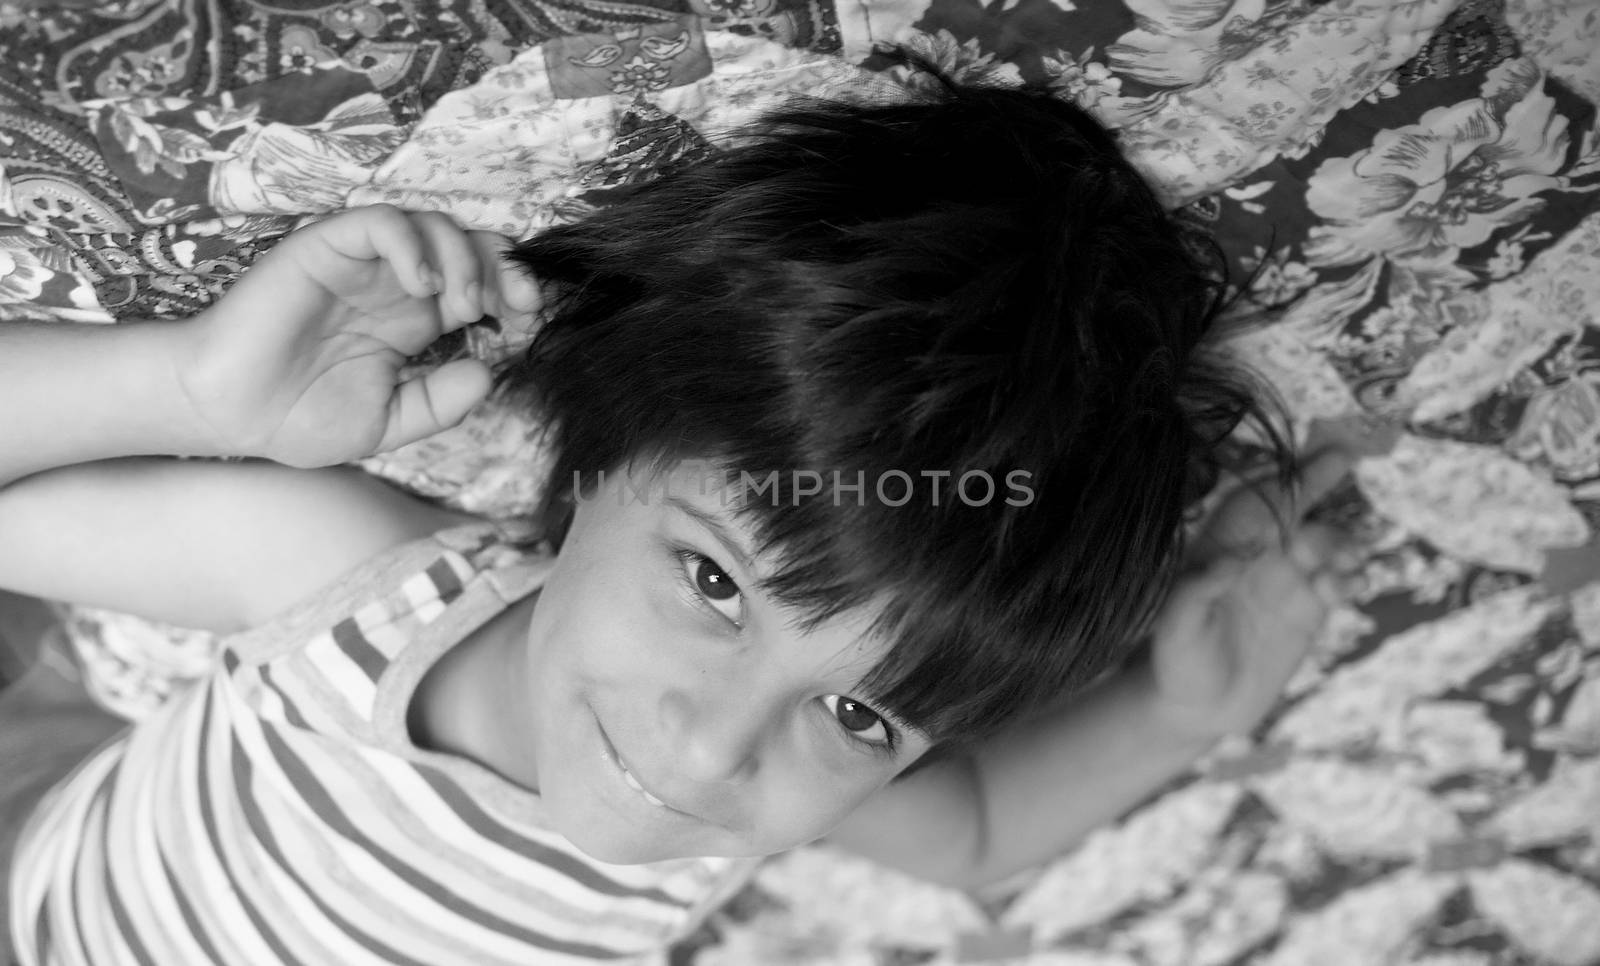 Smiling boy lying, arms outstretched, soft focus